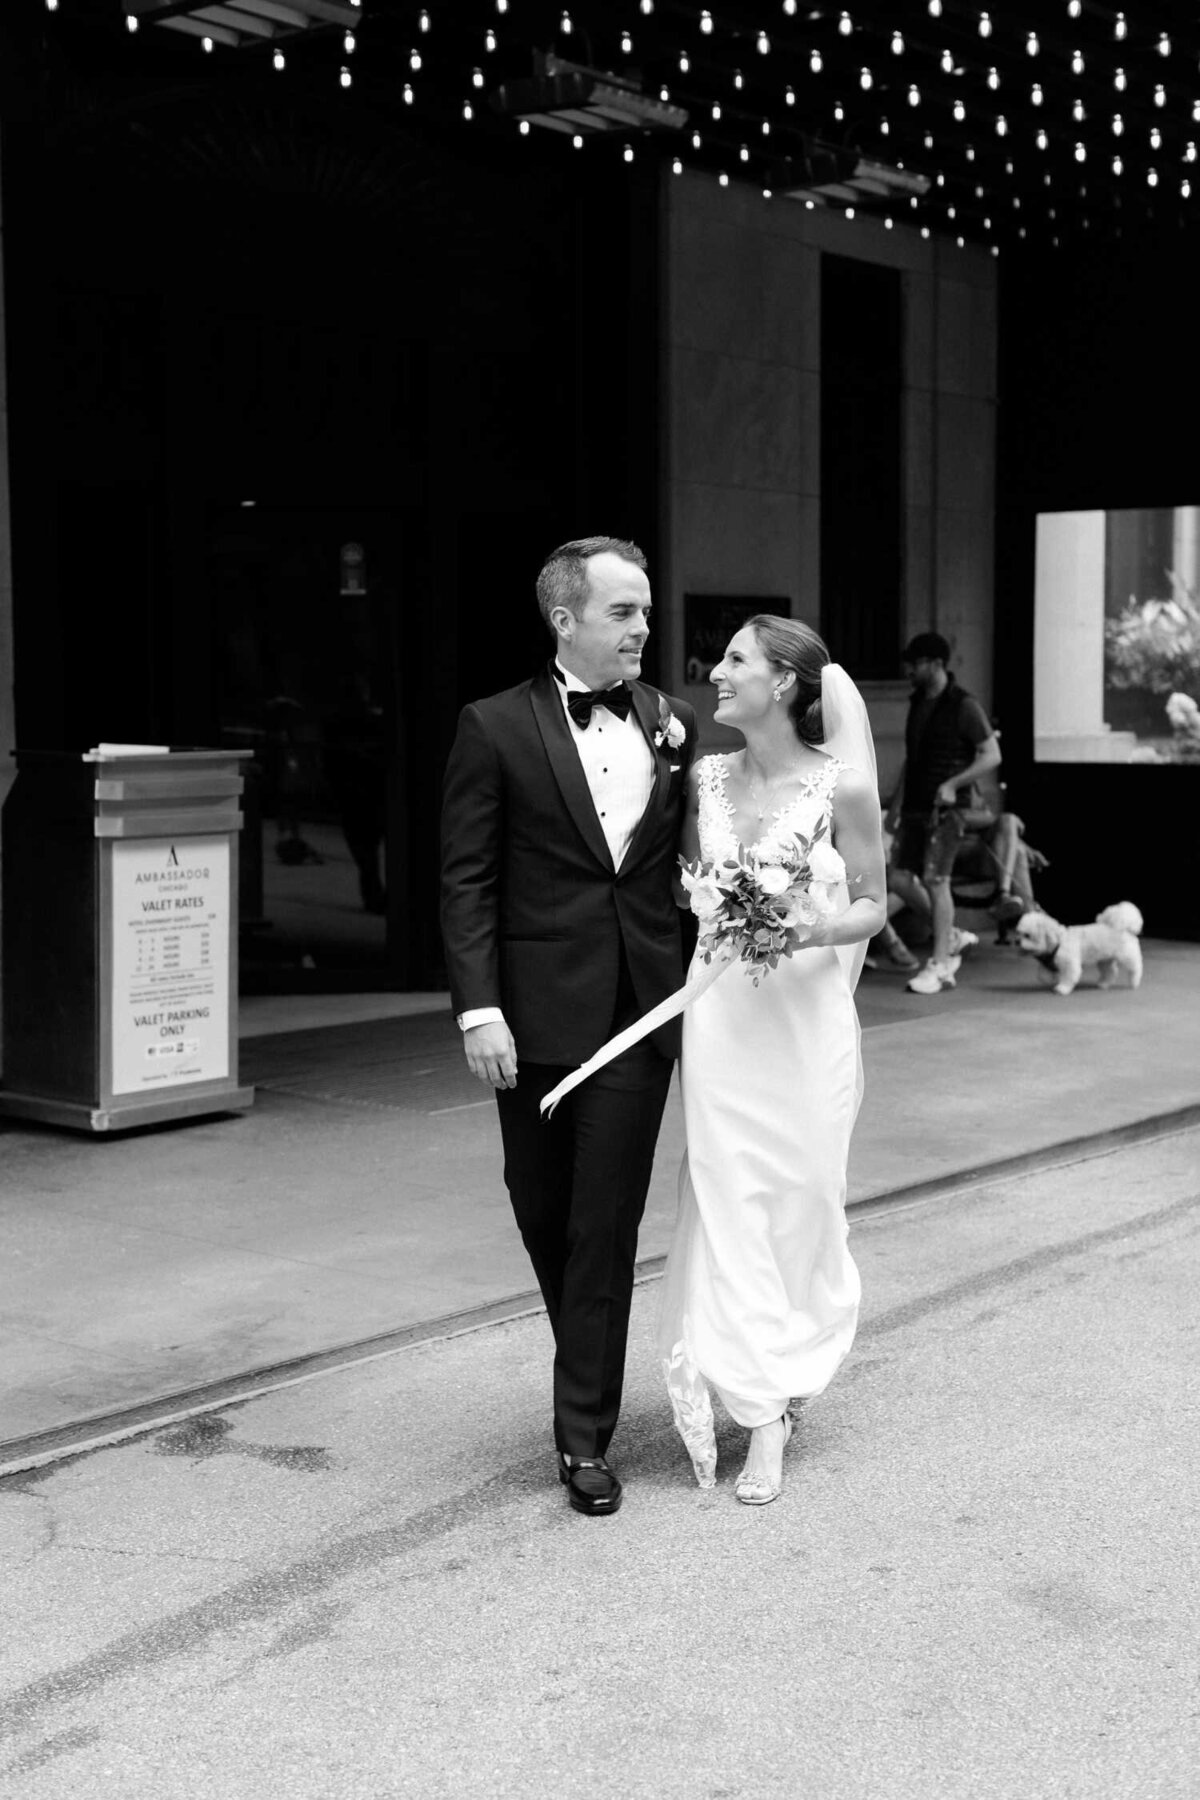 Black and White wedding day city street portrait outside the Ambassador Hotel before their Luxury Chicago Outdoor Historic Wedding Venue.